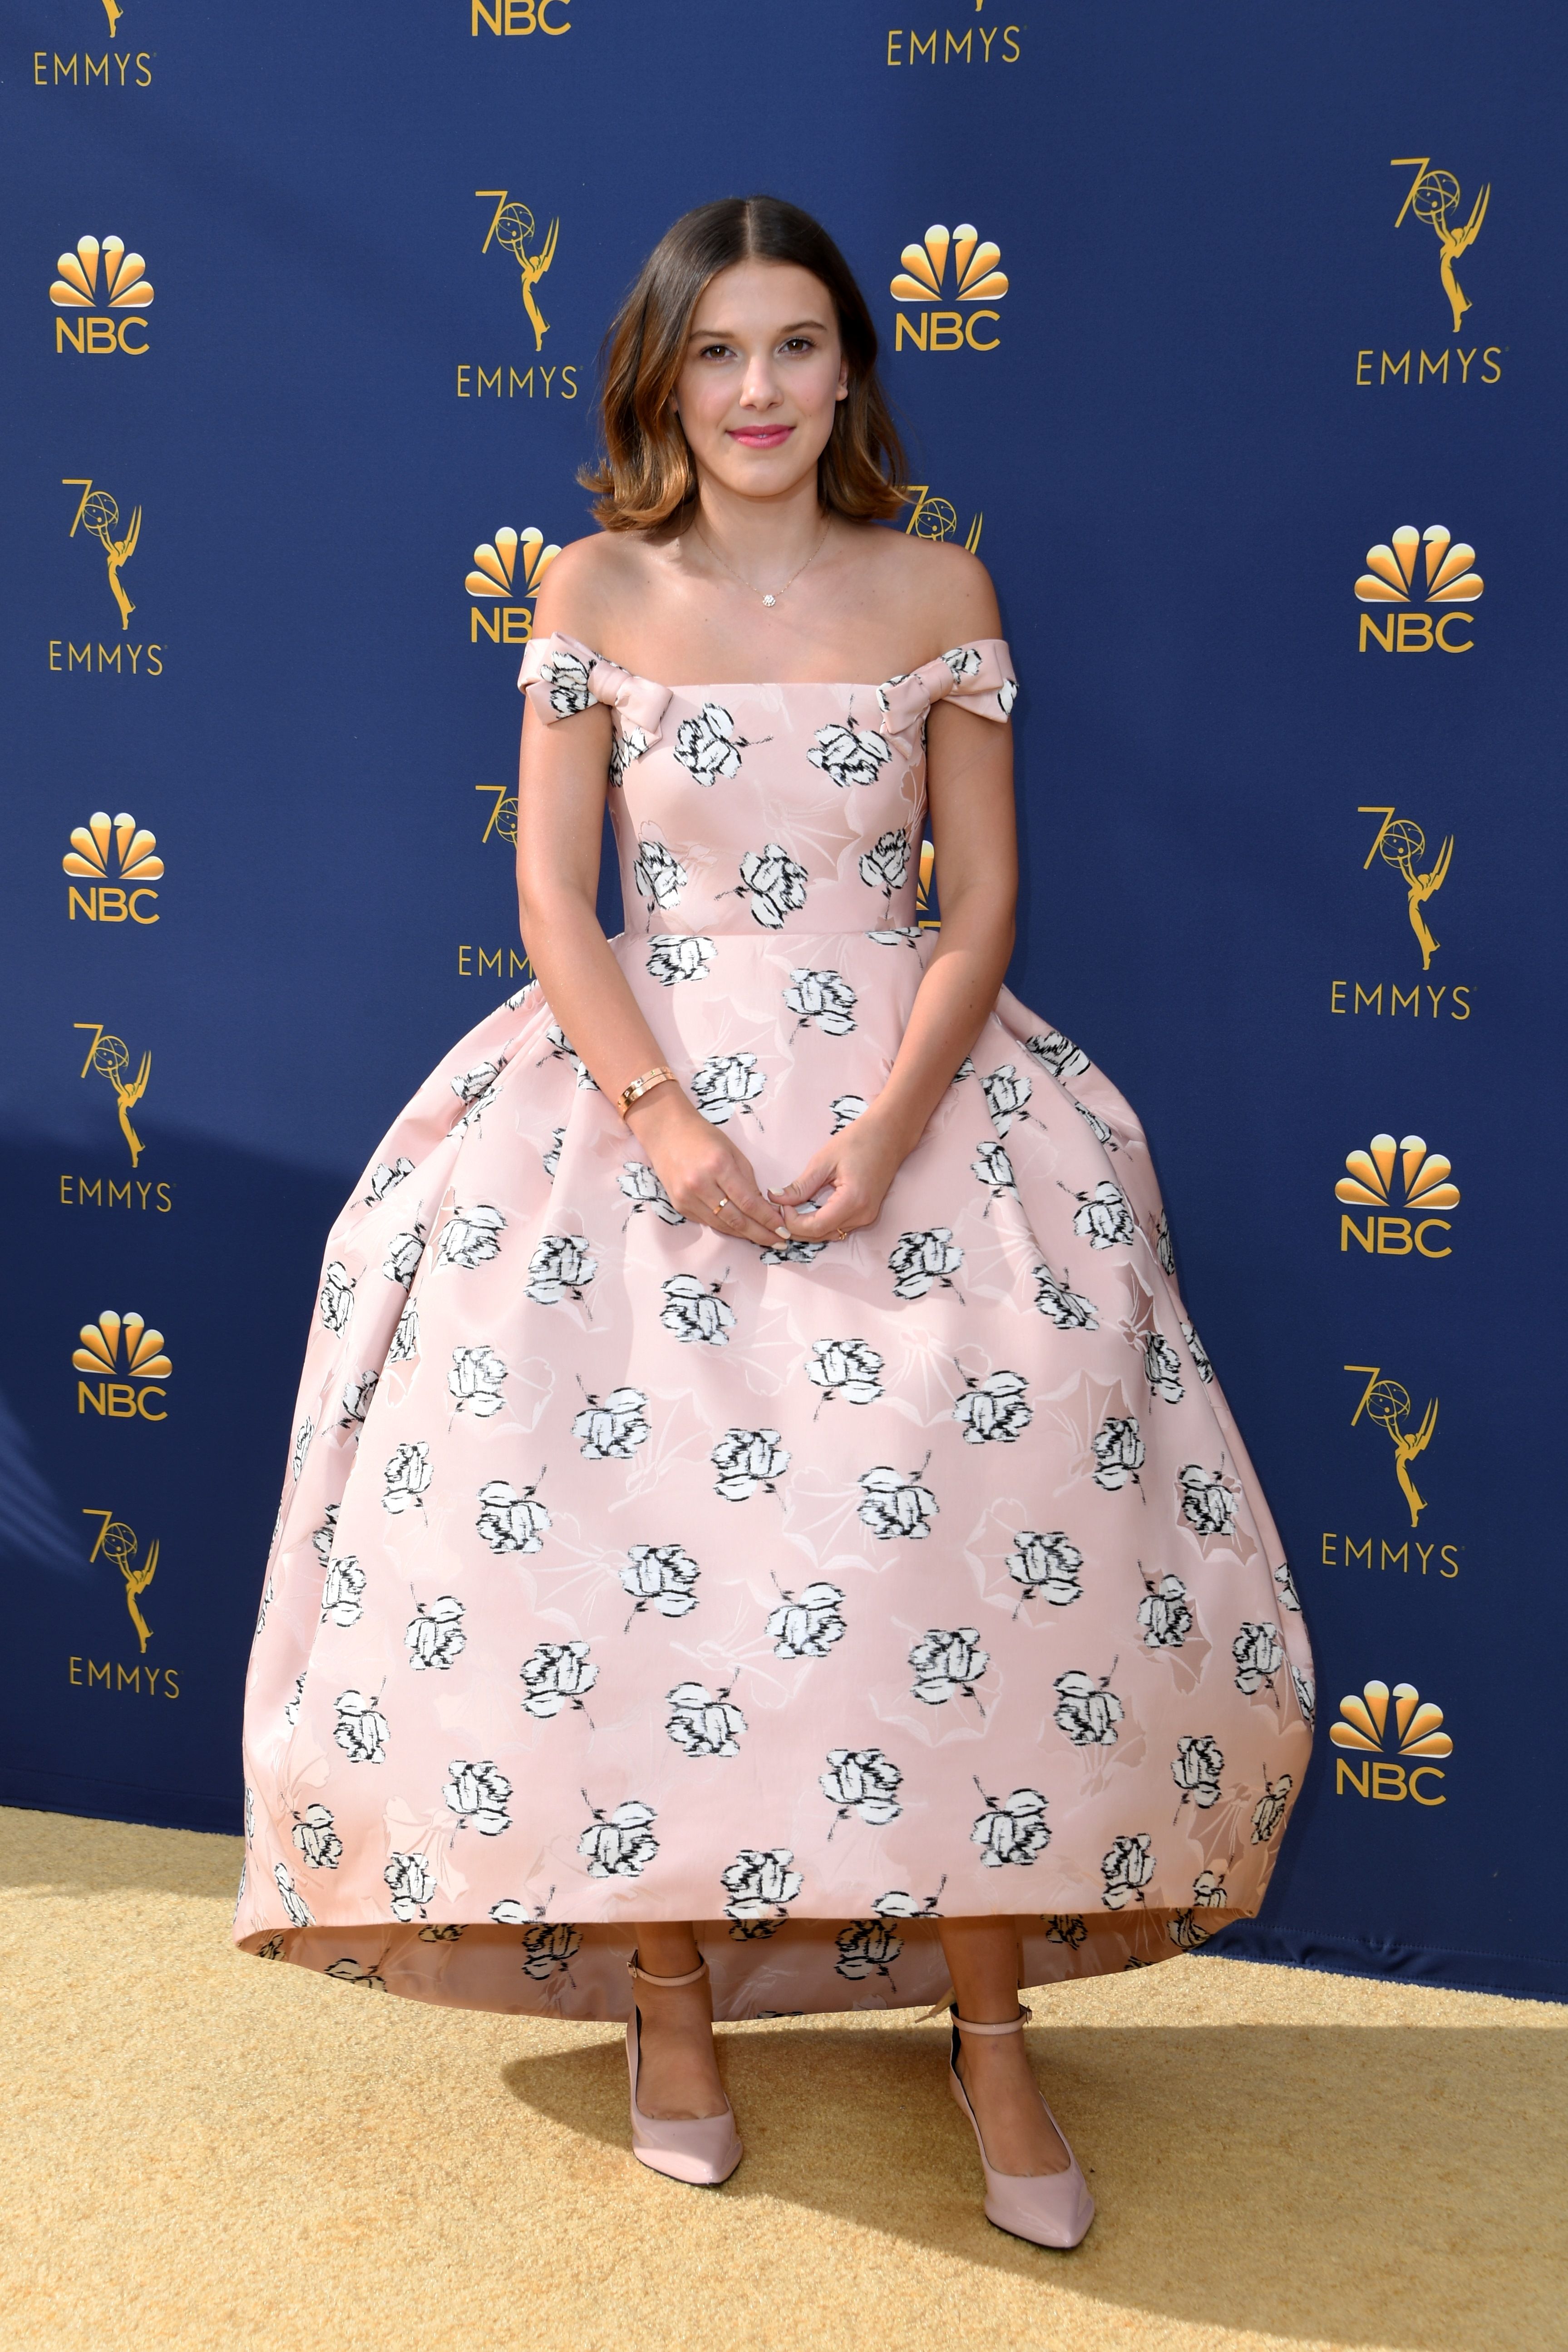 Emmys 2018: Millie Bobby Brown Wore CALVIN KLEIN BY APPOINTMENT